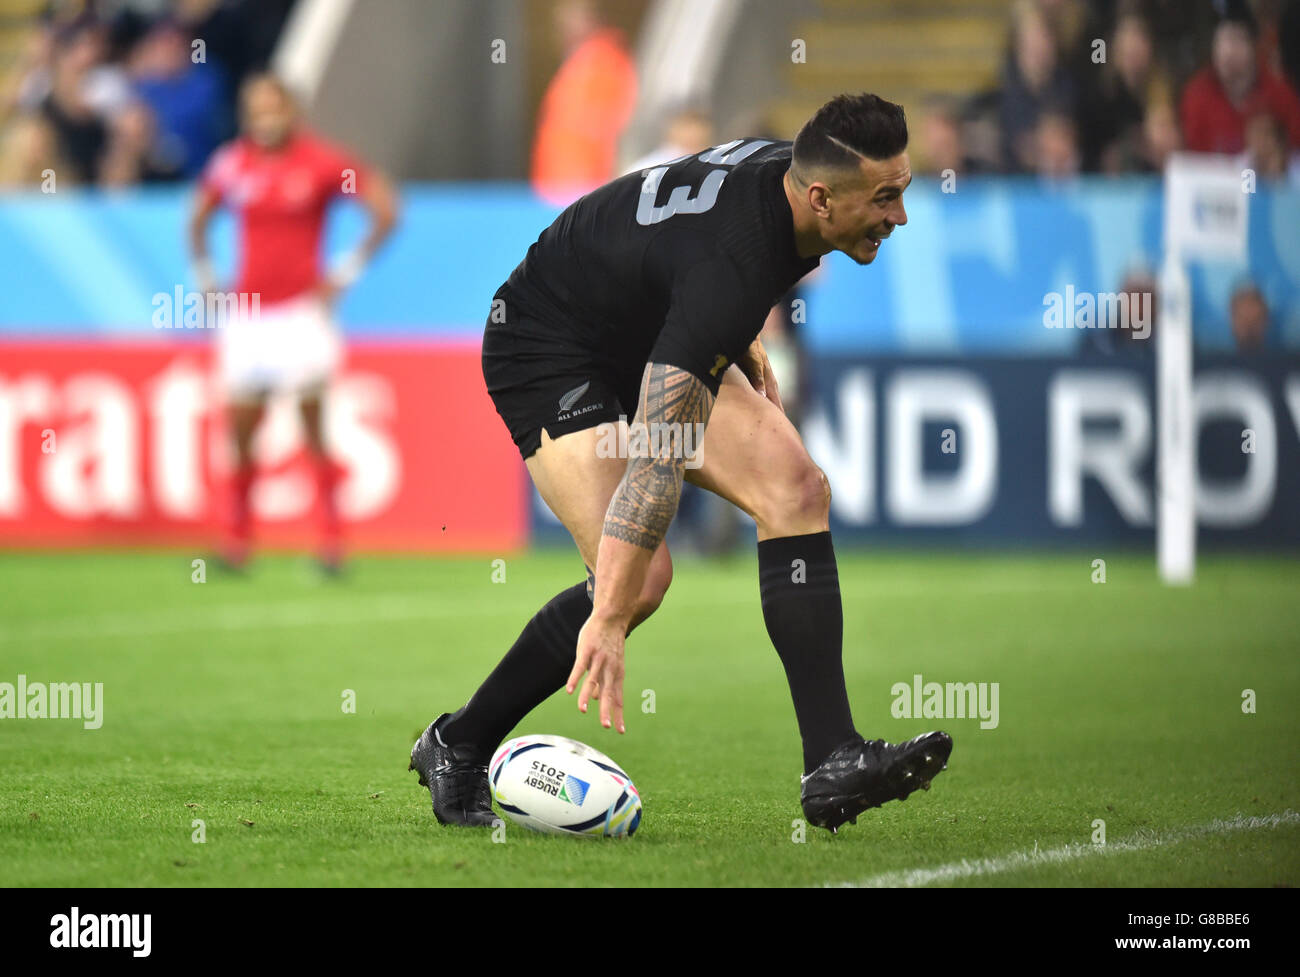 New Zealand's Sonny Bill Williams scores a try during the World Cup match at St James' Park, Newcastle. Stock Photo